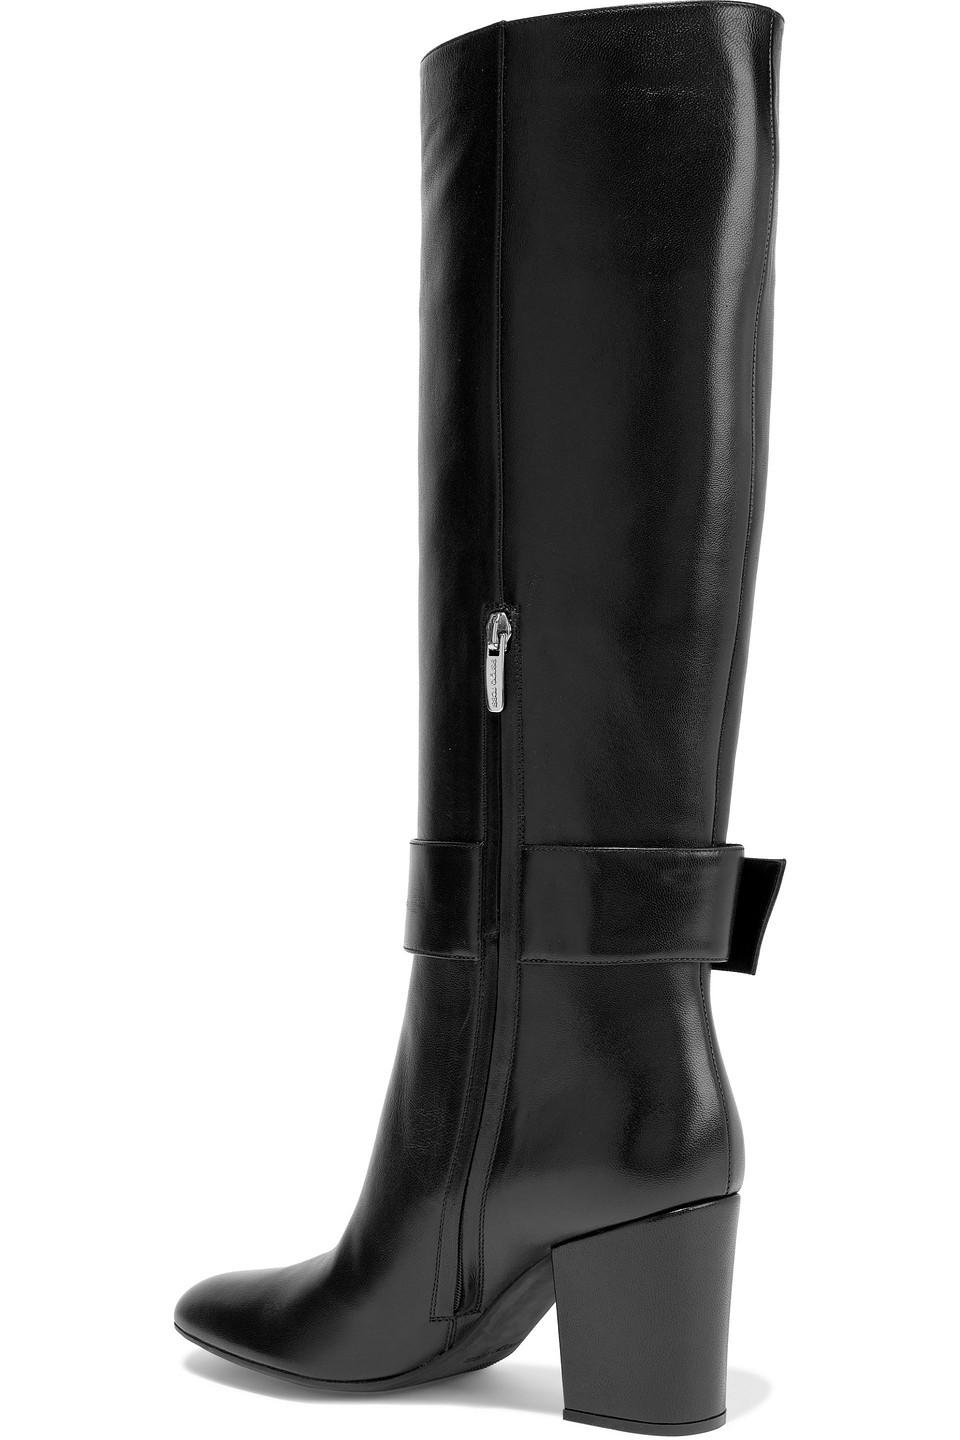 Sergio Rossi Sr Mia 75 Buckled Leather Knee Boots in Black - Lyst